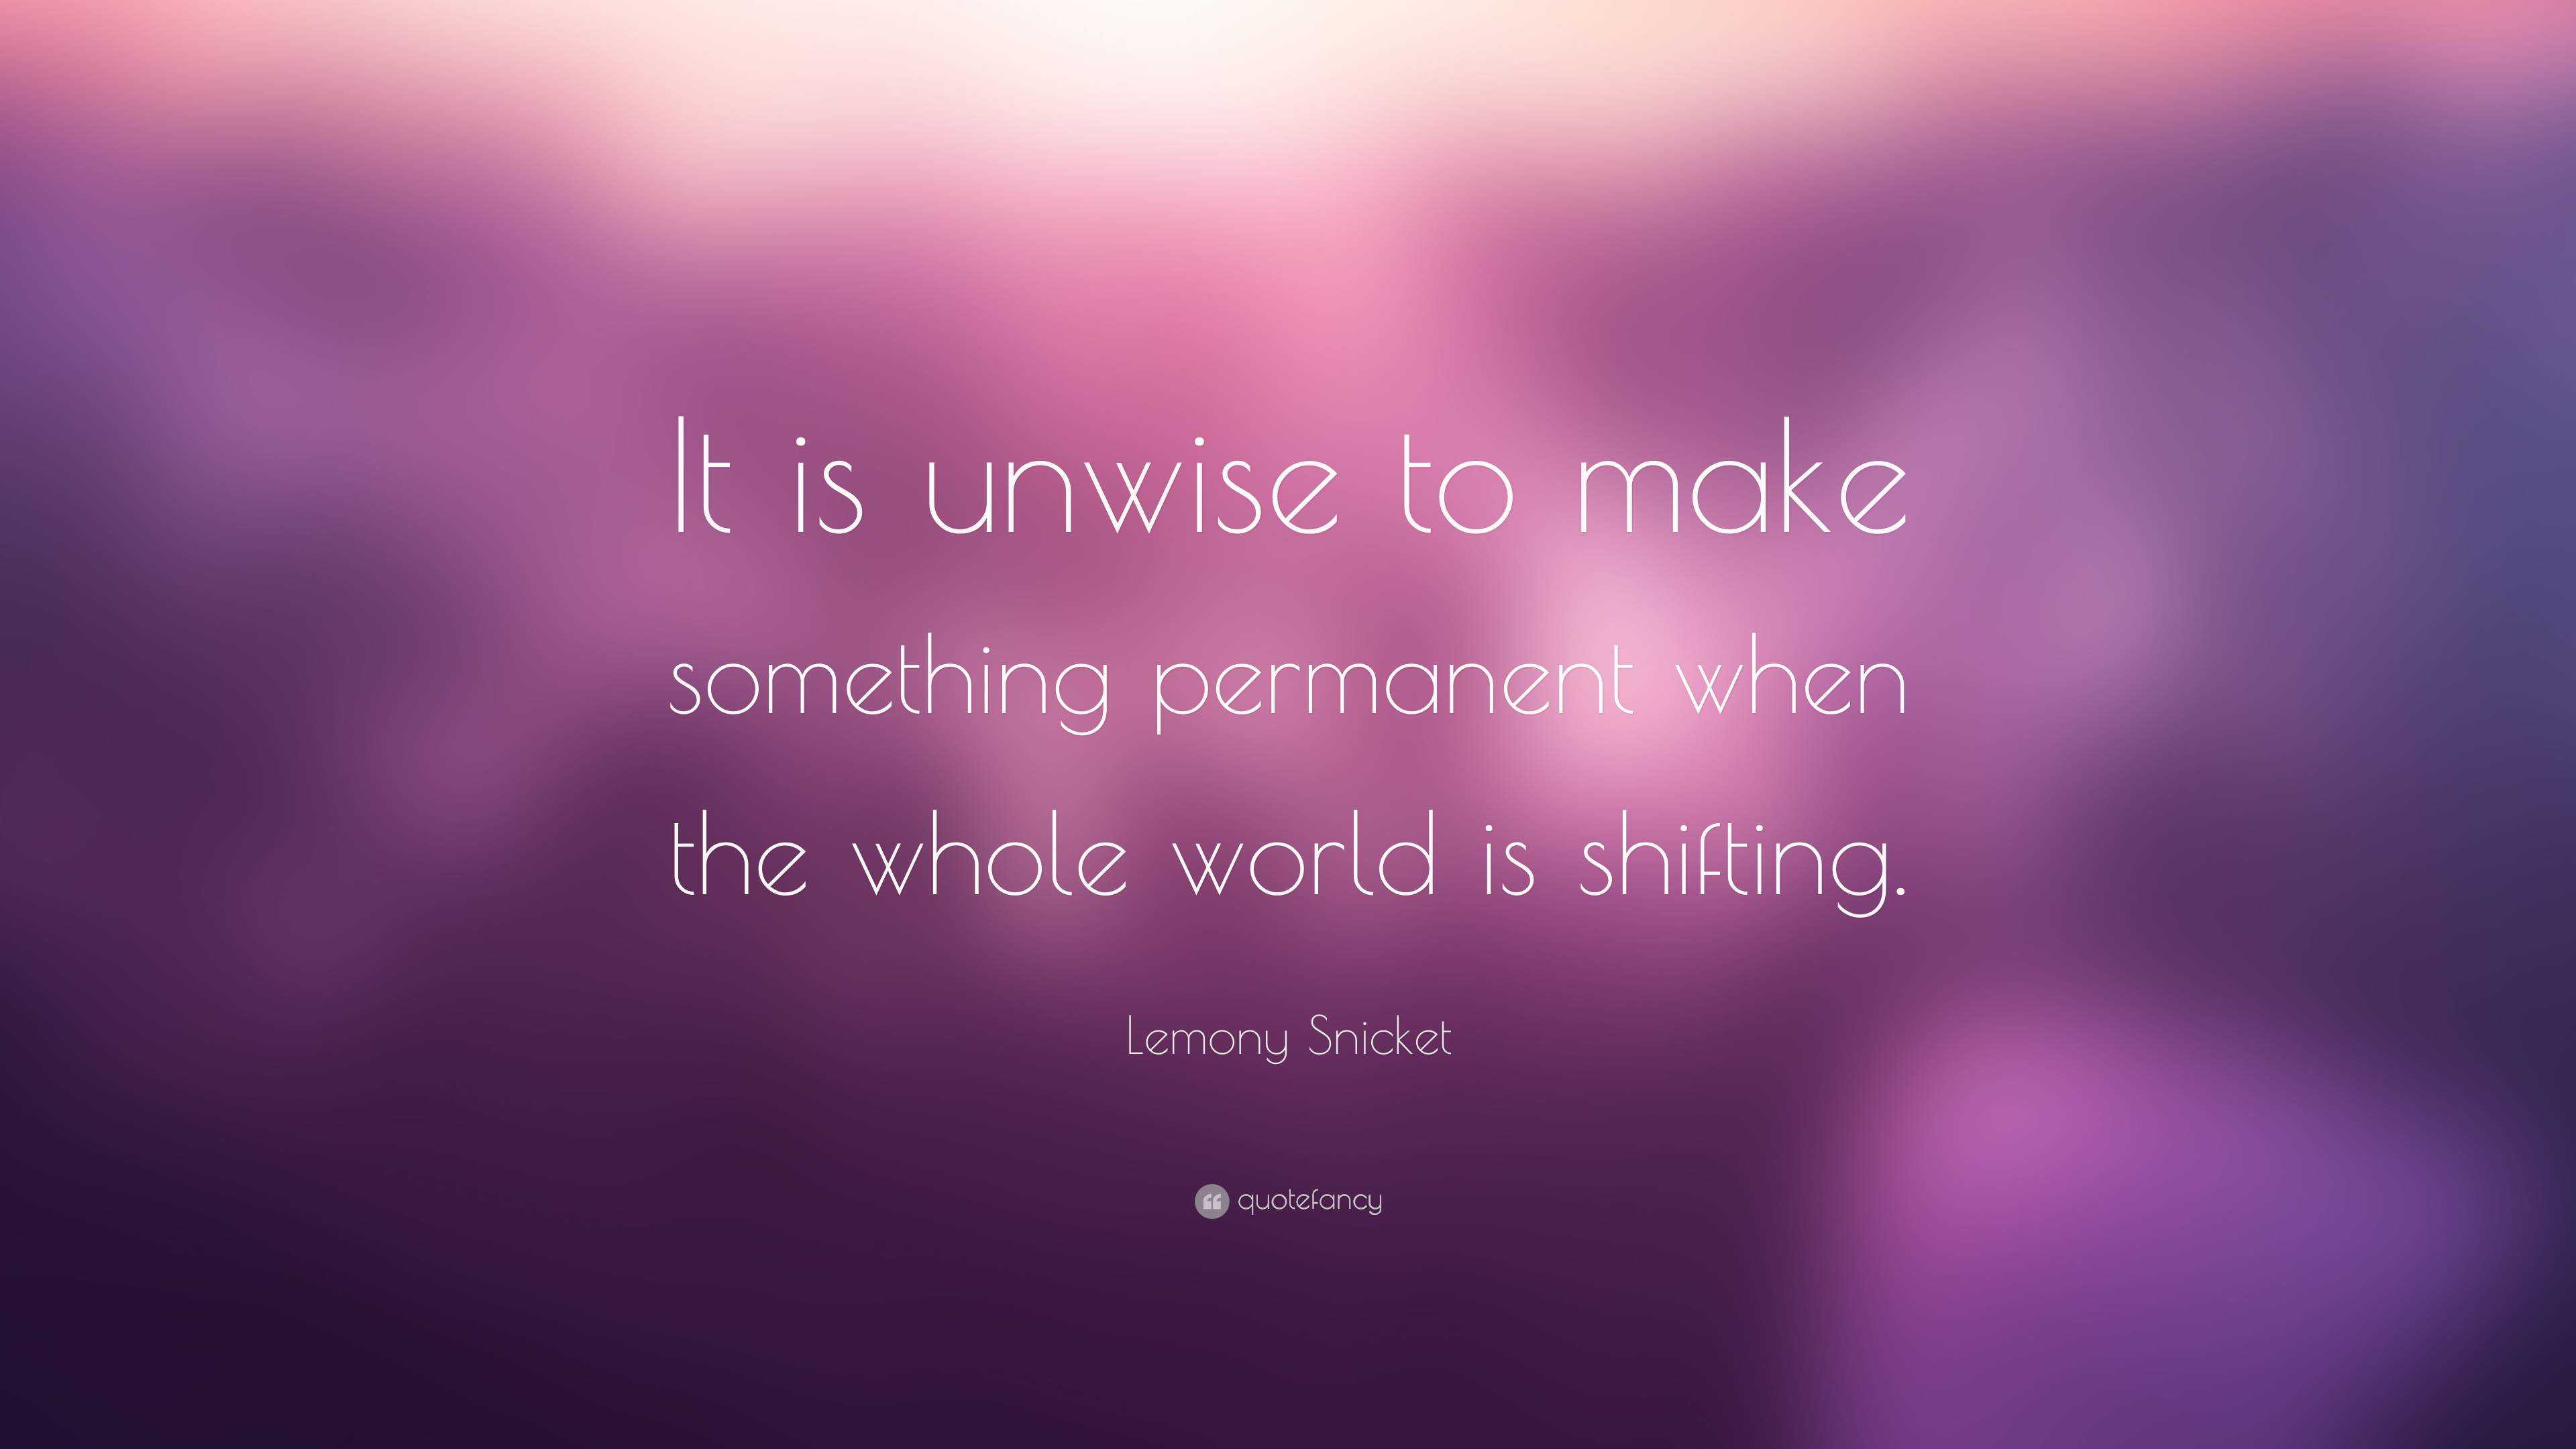 Lemony Snicket Quote: “It is unwise to make something permanent when ...